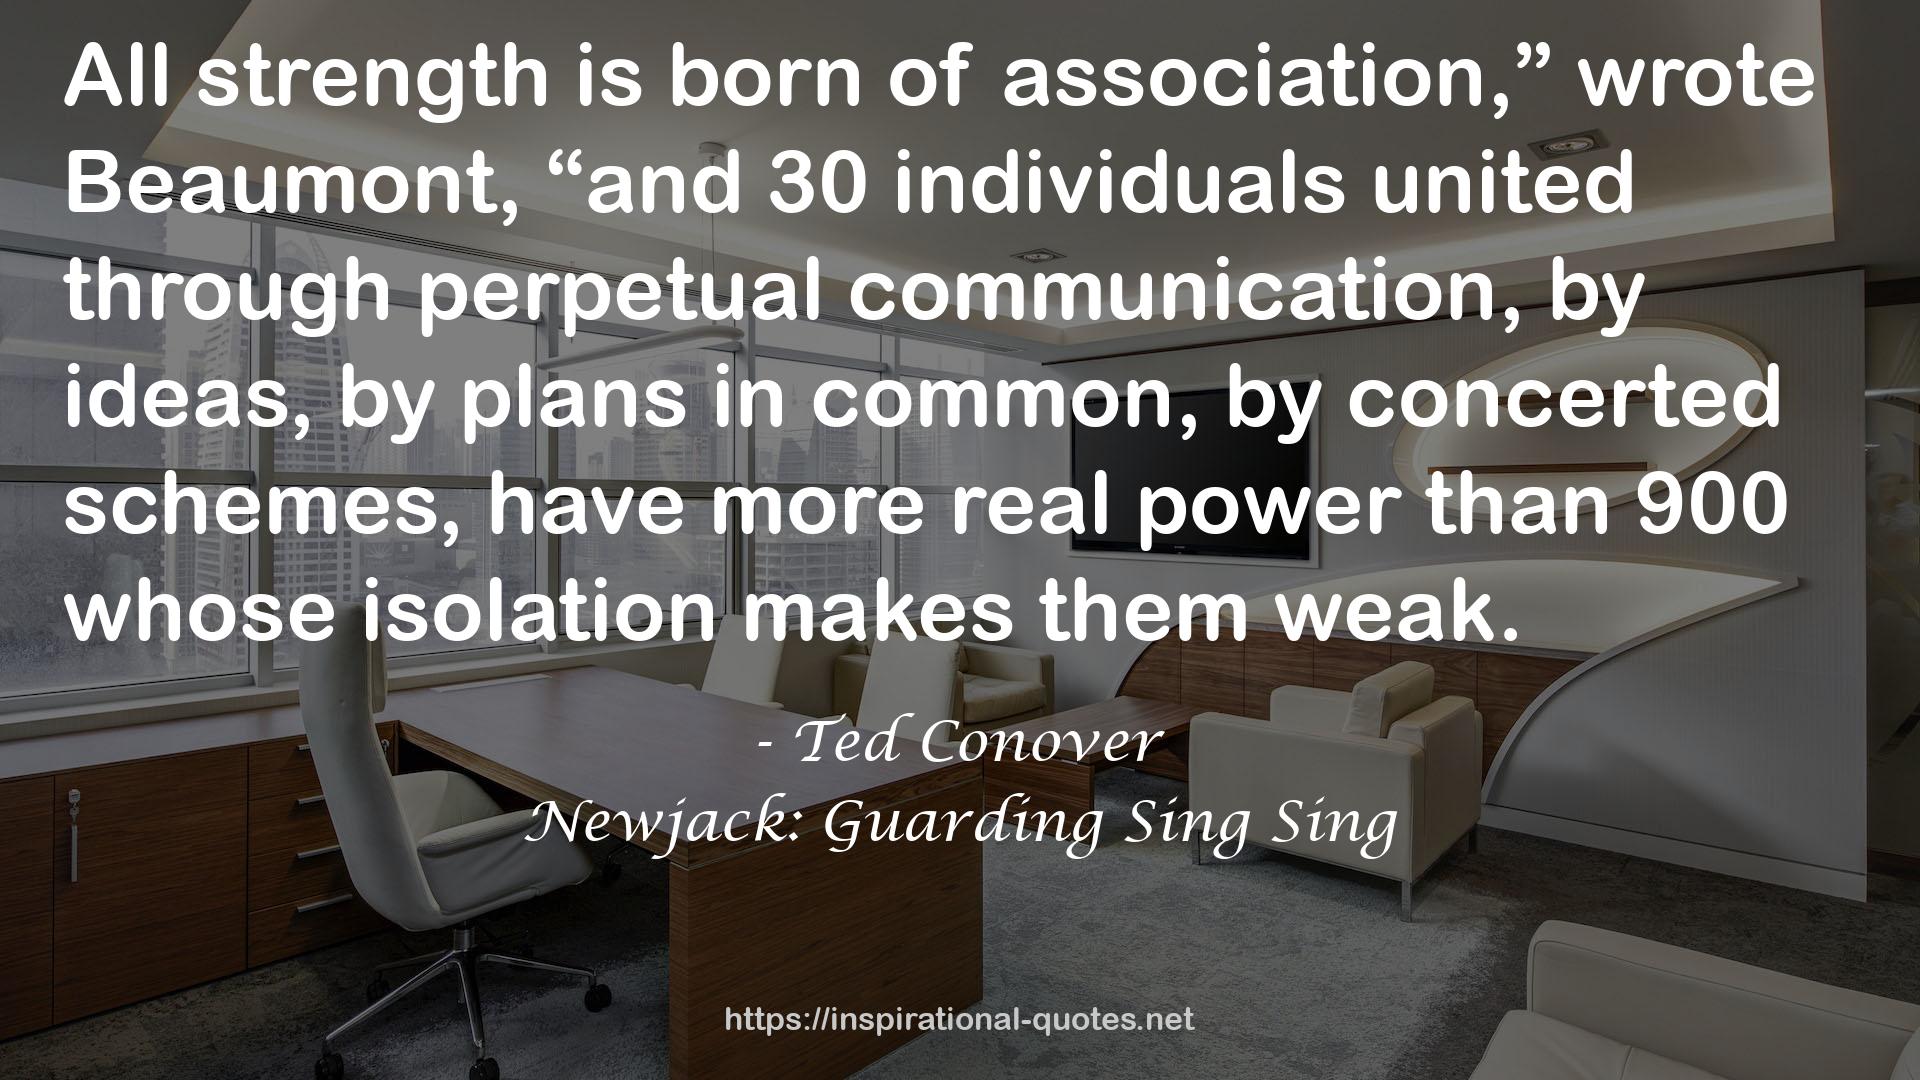 Newjack: Guarding Sing Sing QUOTES